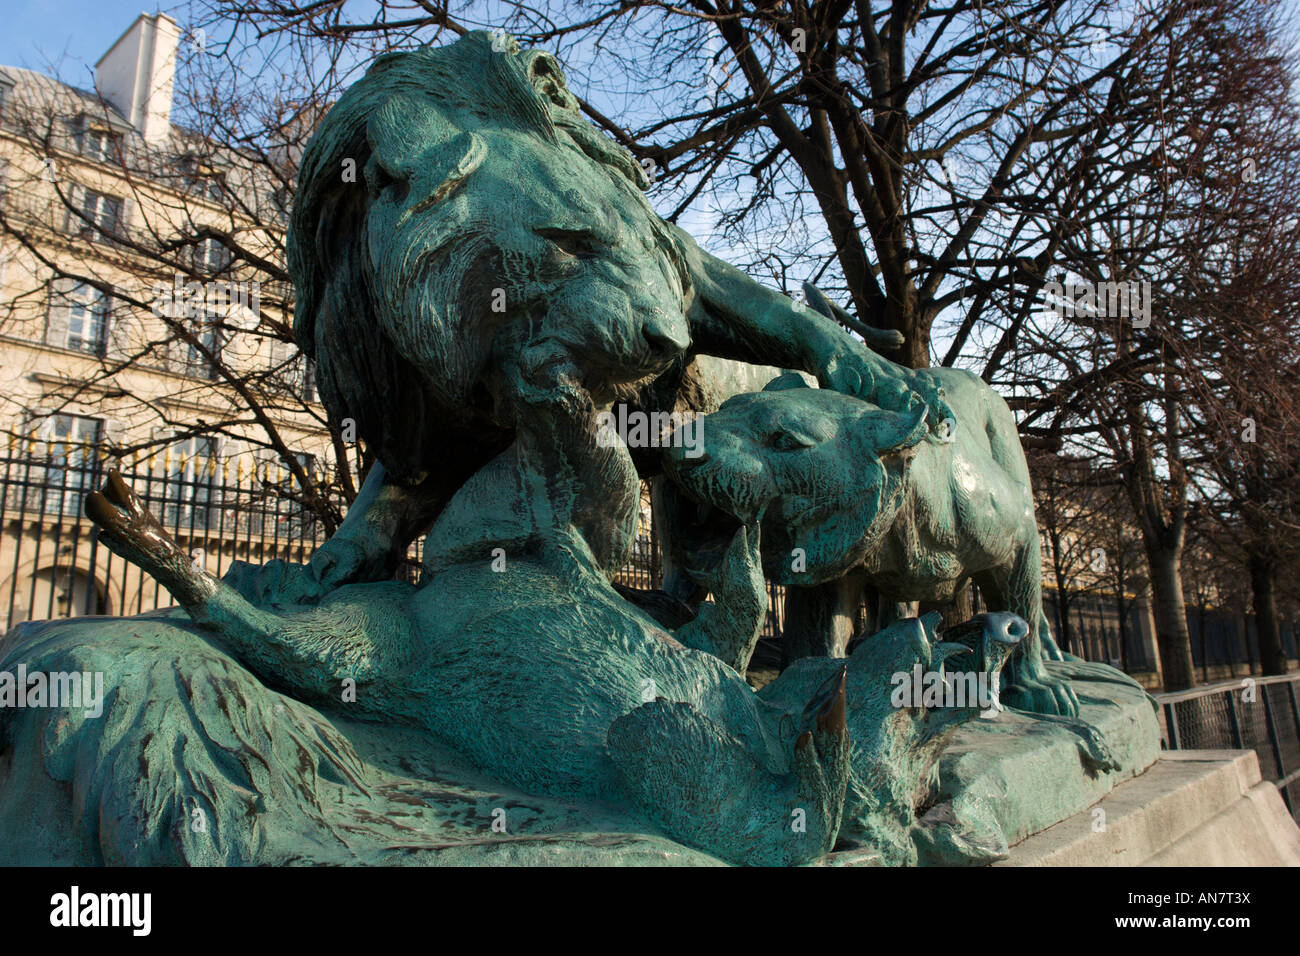 Statue of lions attacking a hog at Jardin des Tuileries Paris France Stock Photo